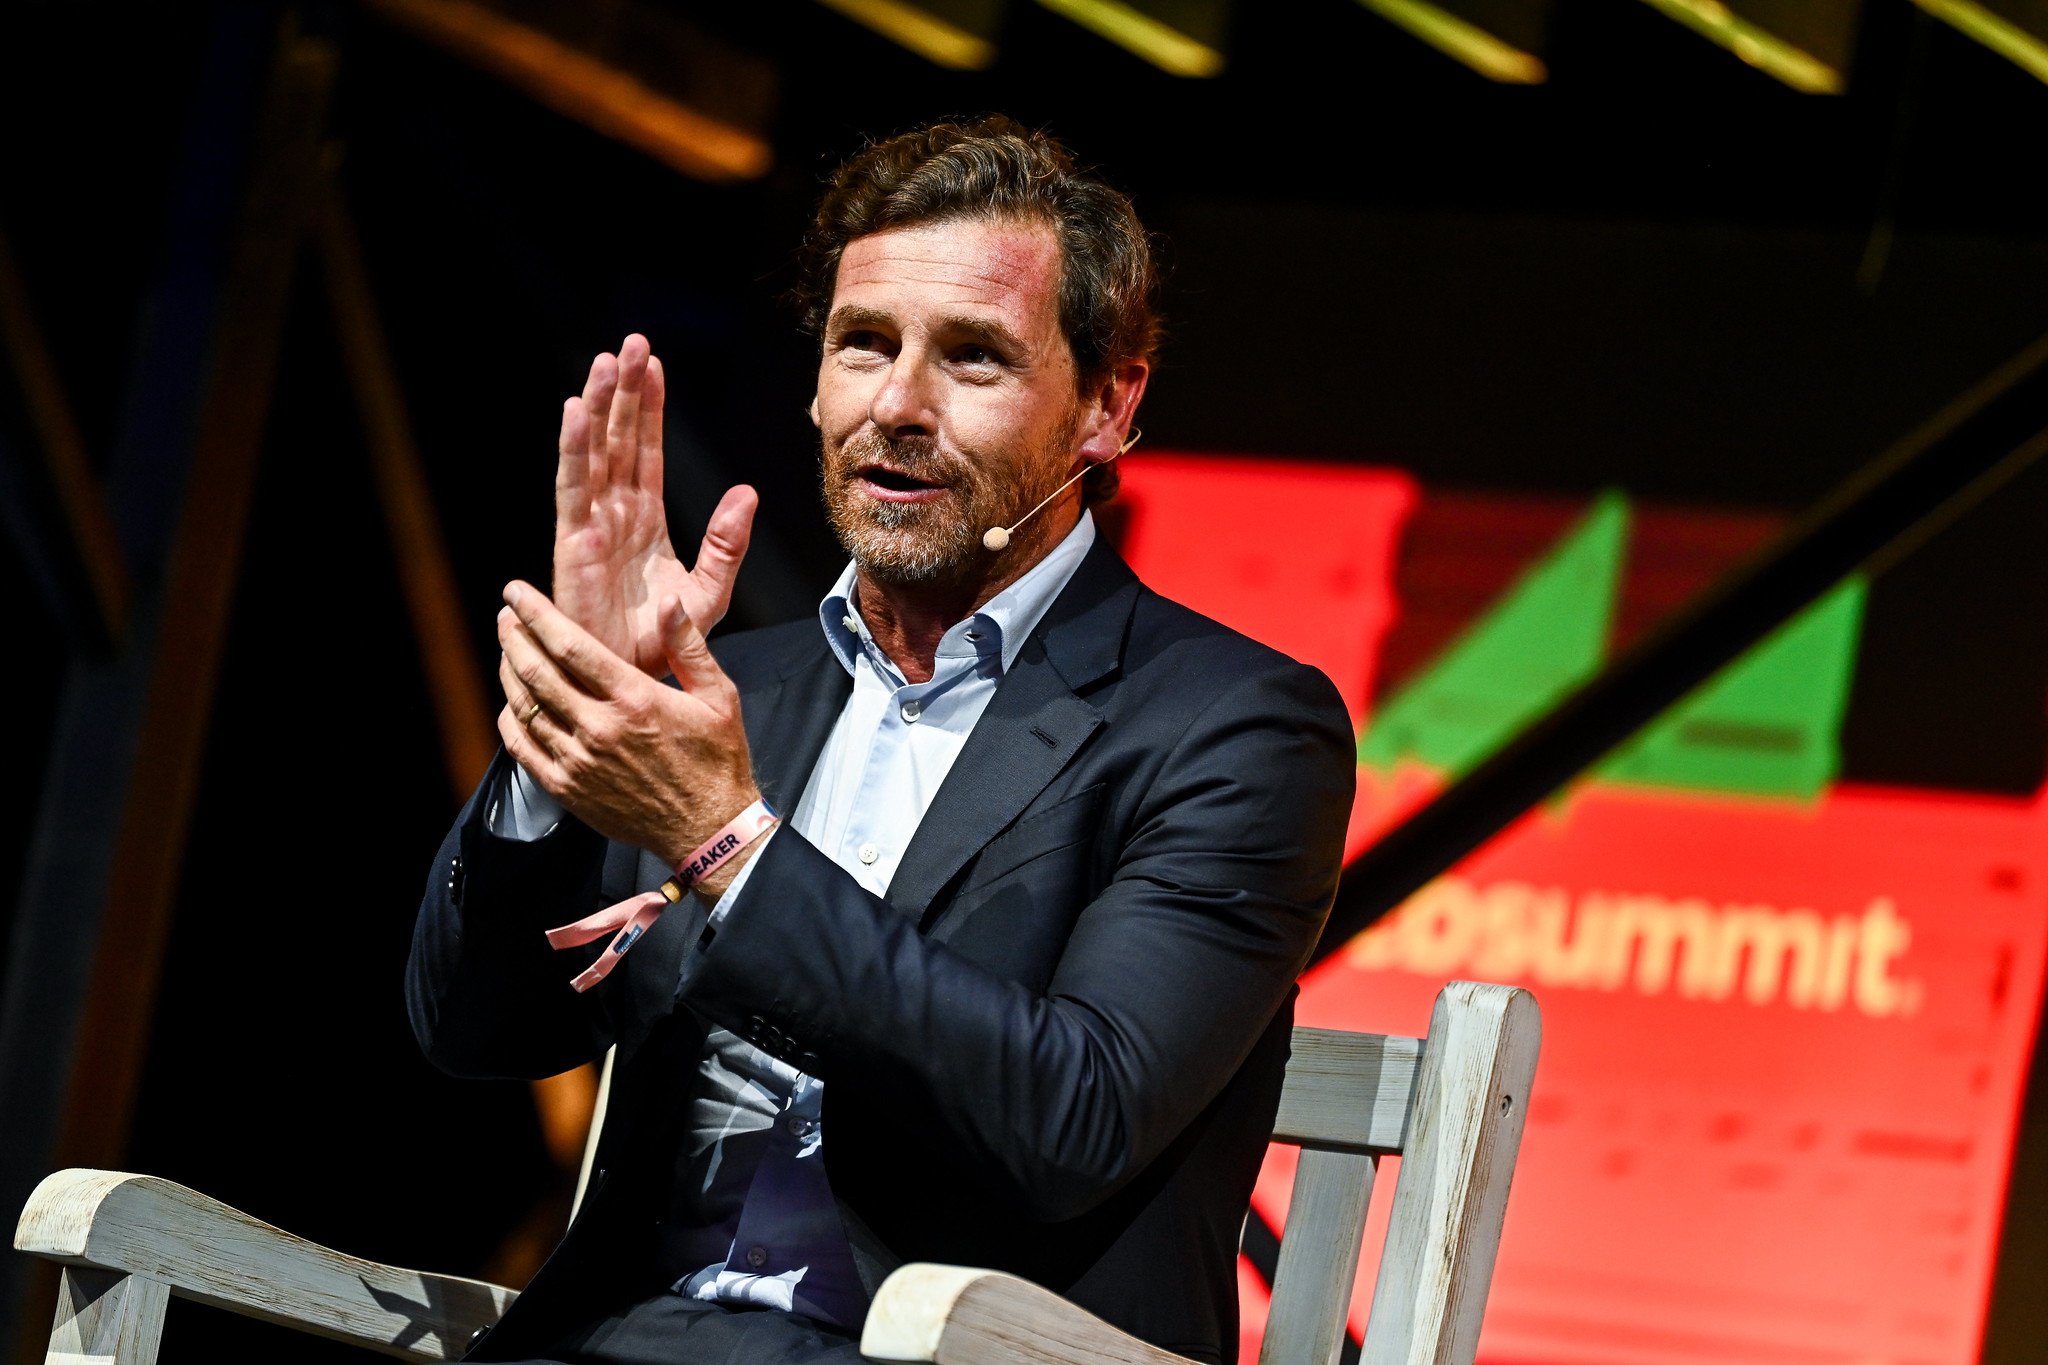 André Villas-Boas, Football Manager on SportsTrade stage during day one of Web Summit 2023 at the Altice Arena in Lisbon, Portugal.